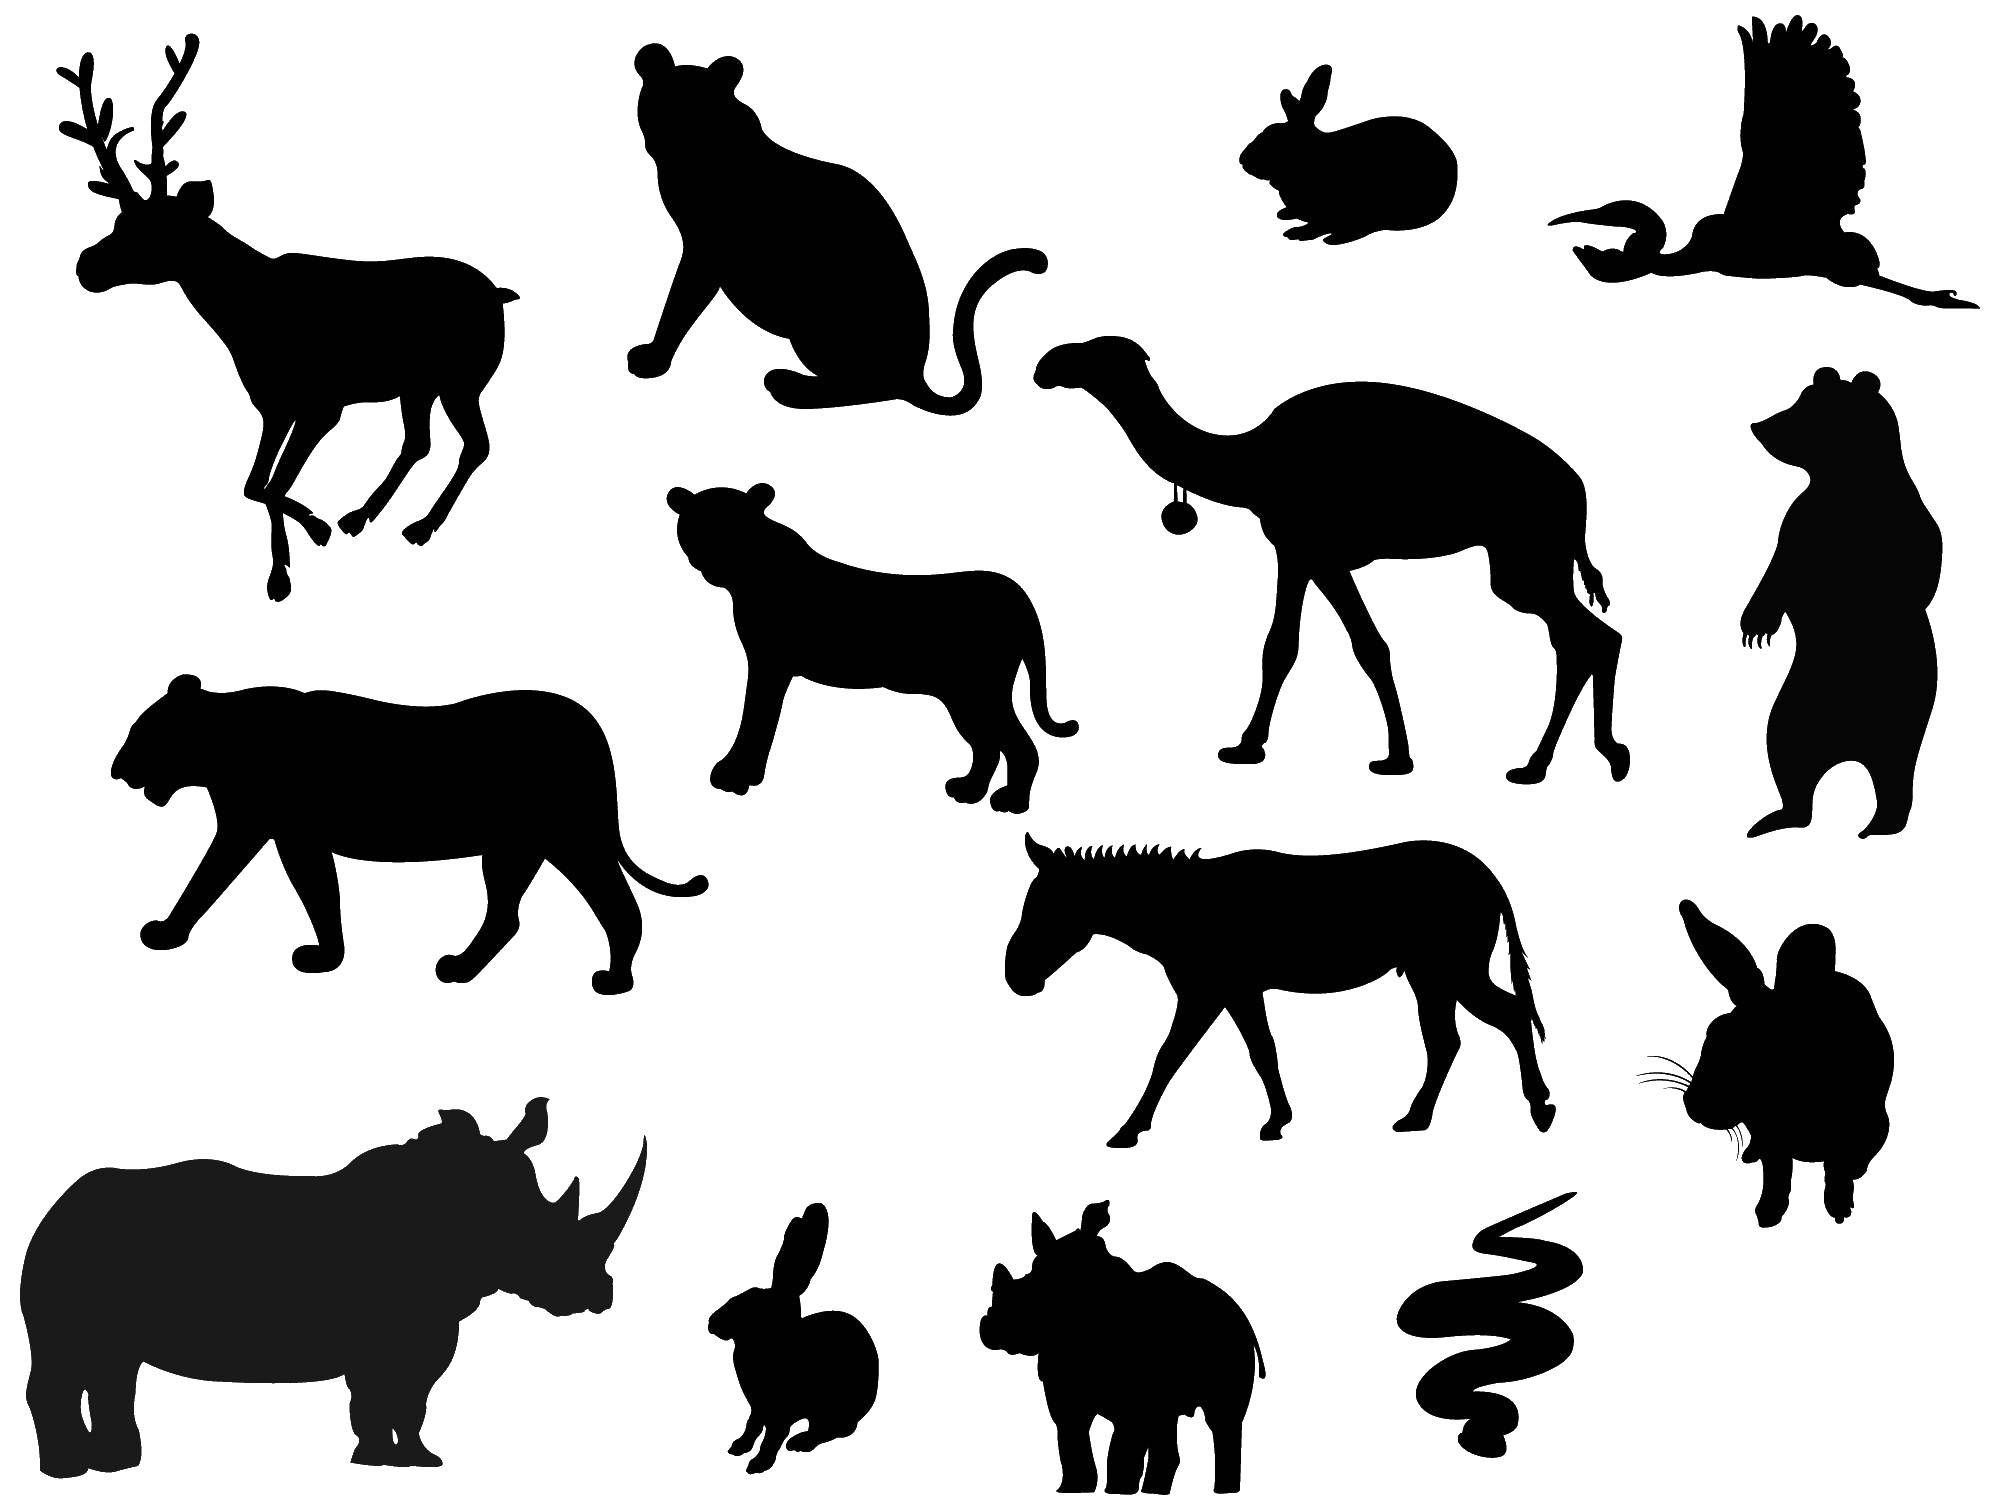 Coloring The contours of the animal. Category The contours of animals. Tags:  the contours, animals.